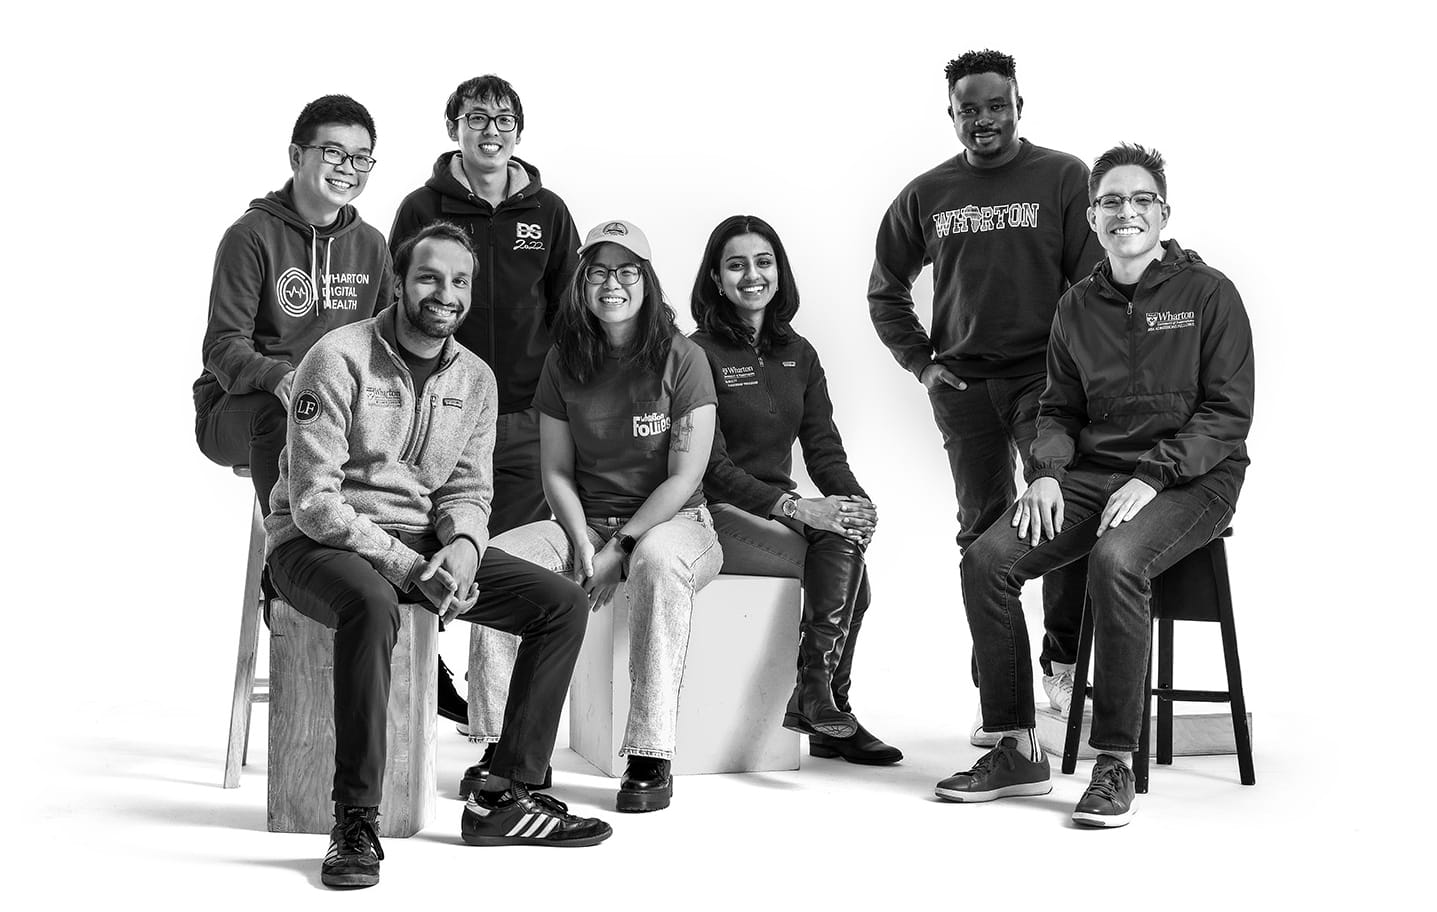 Seven students in the Wharton 1Gen club pose for a photo in Penn and Wharton gear.